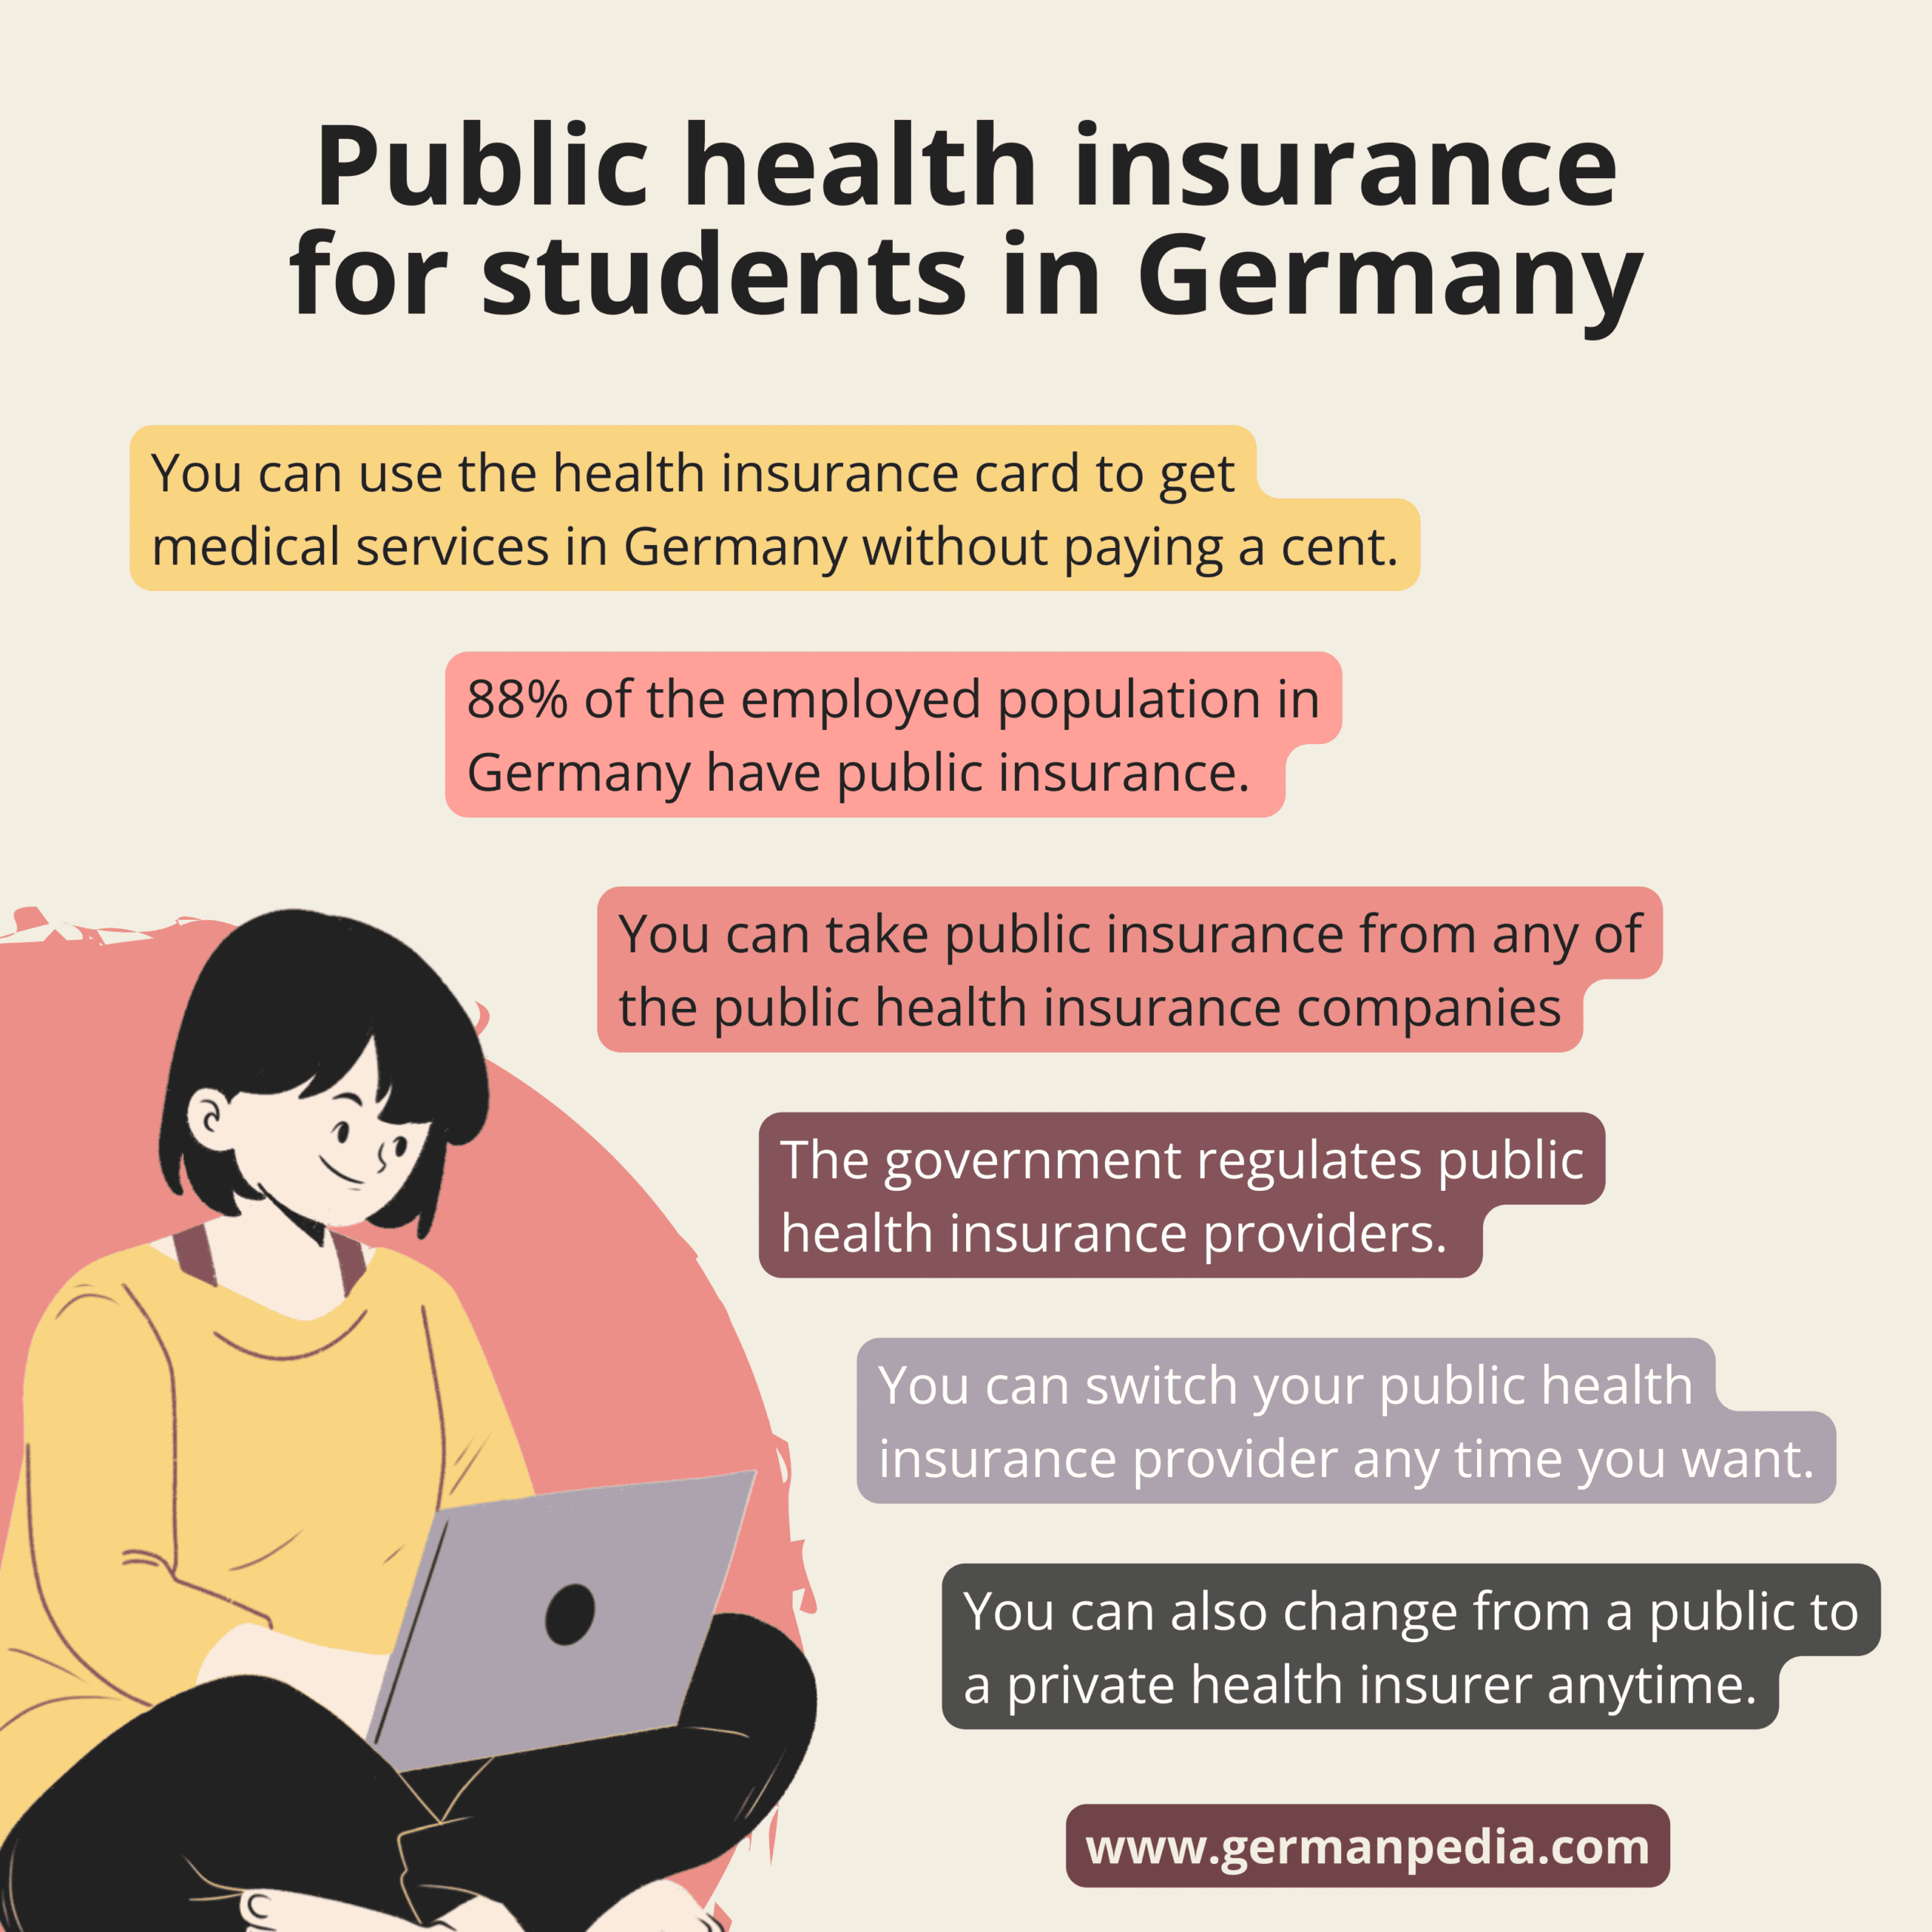 Public health insurance for international students in Germany